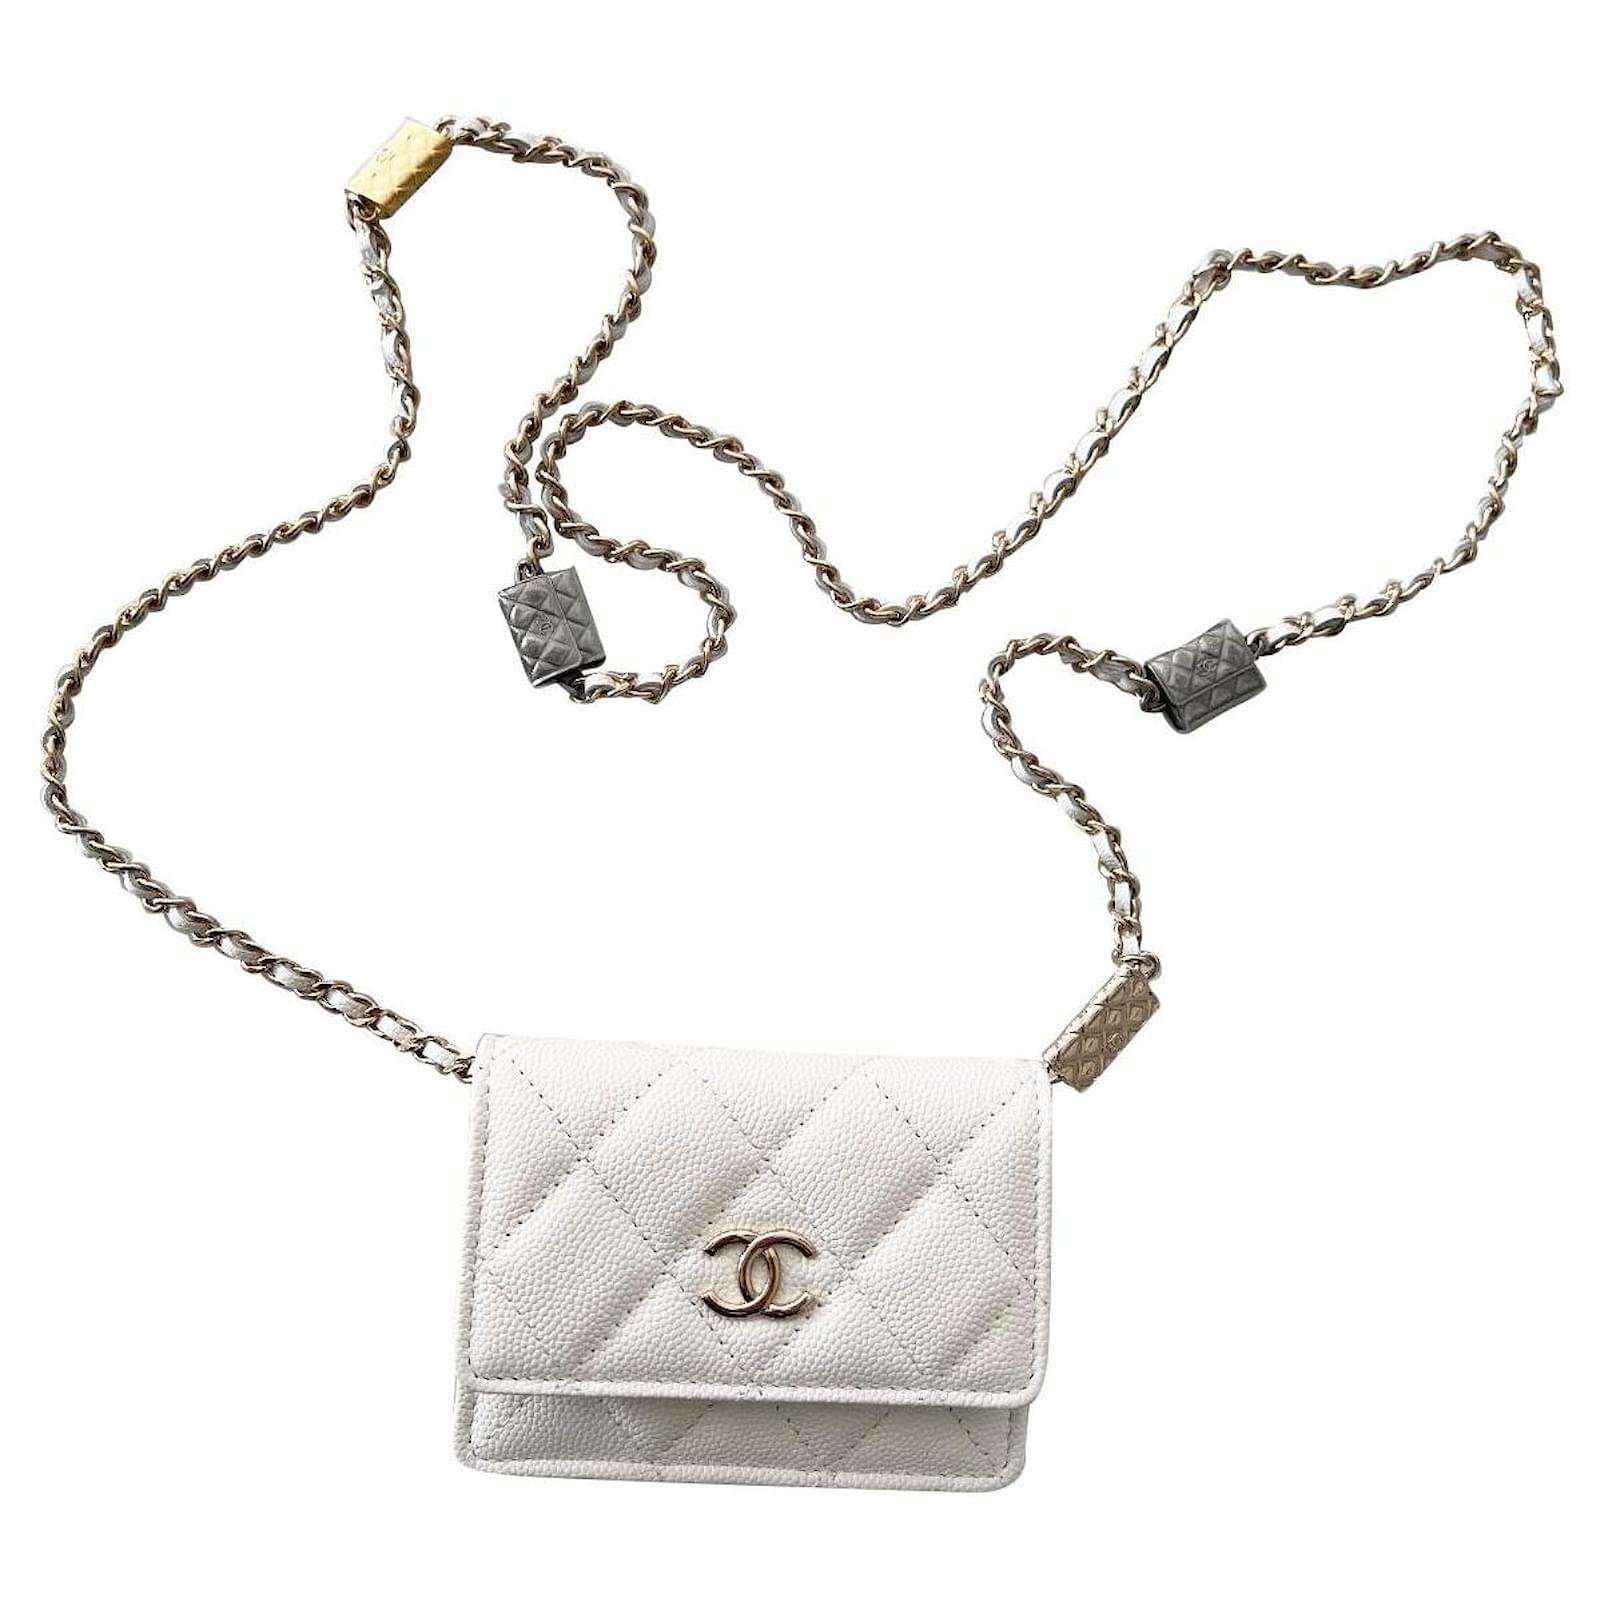 Limited Chanel All About Chains Waist Bag Fanny Pack 19A